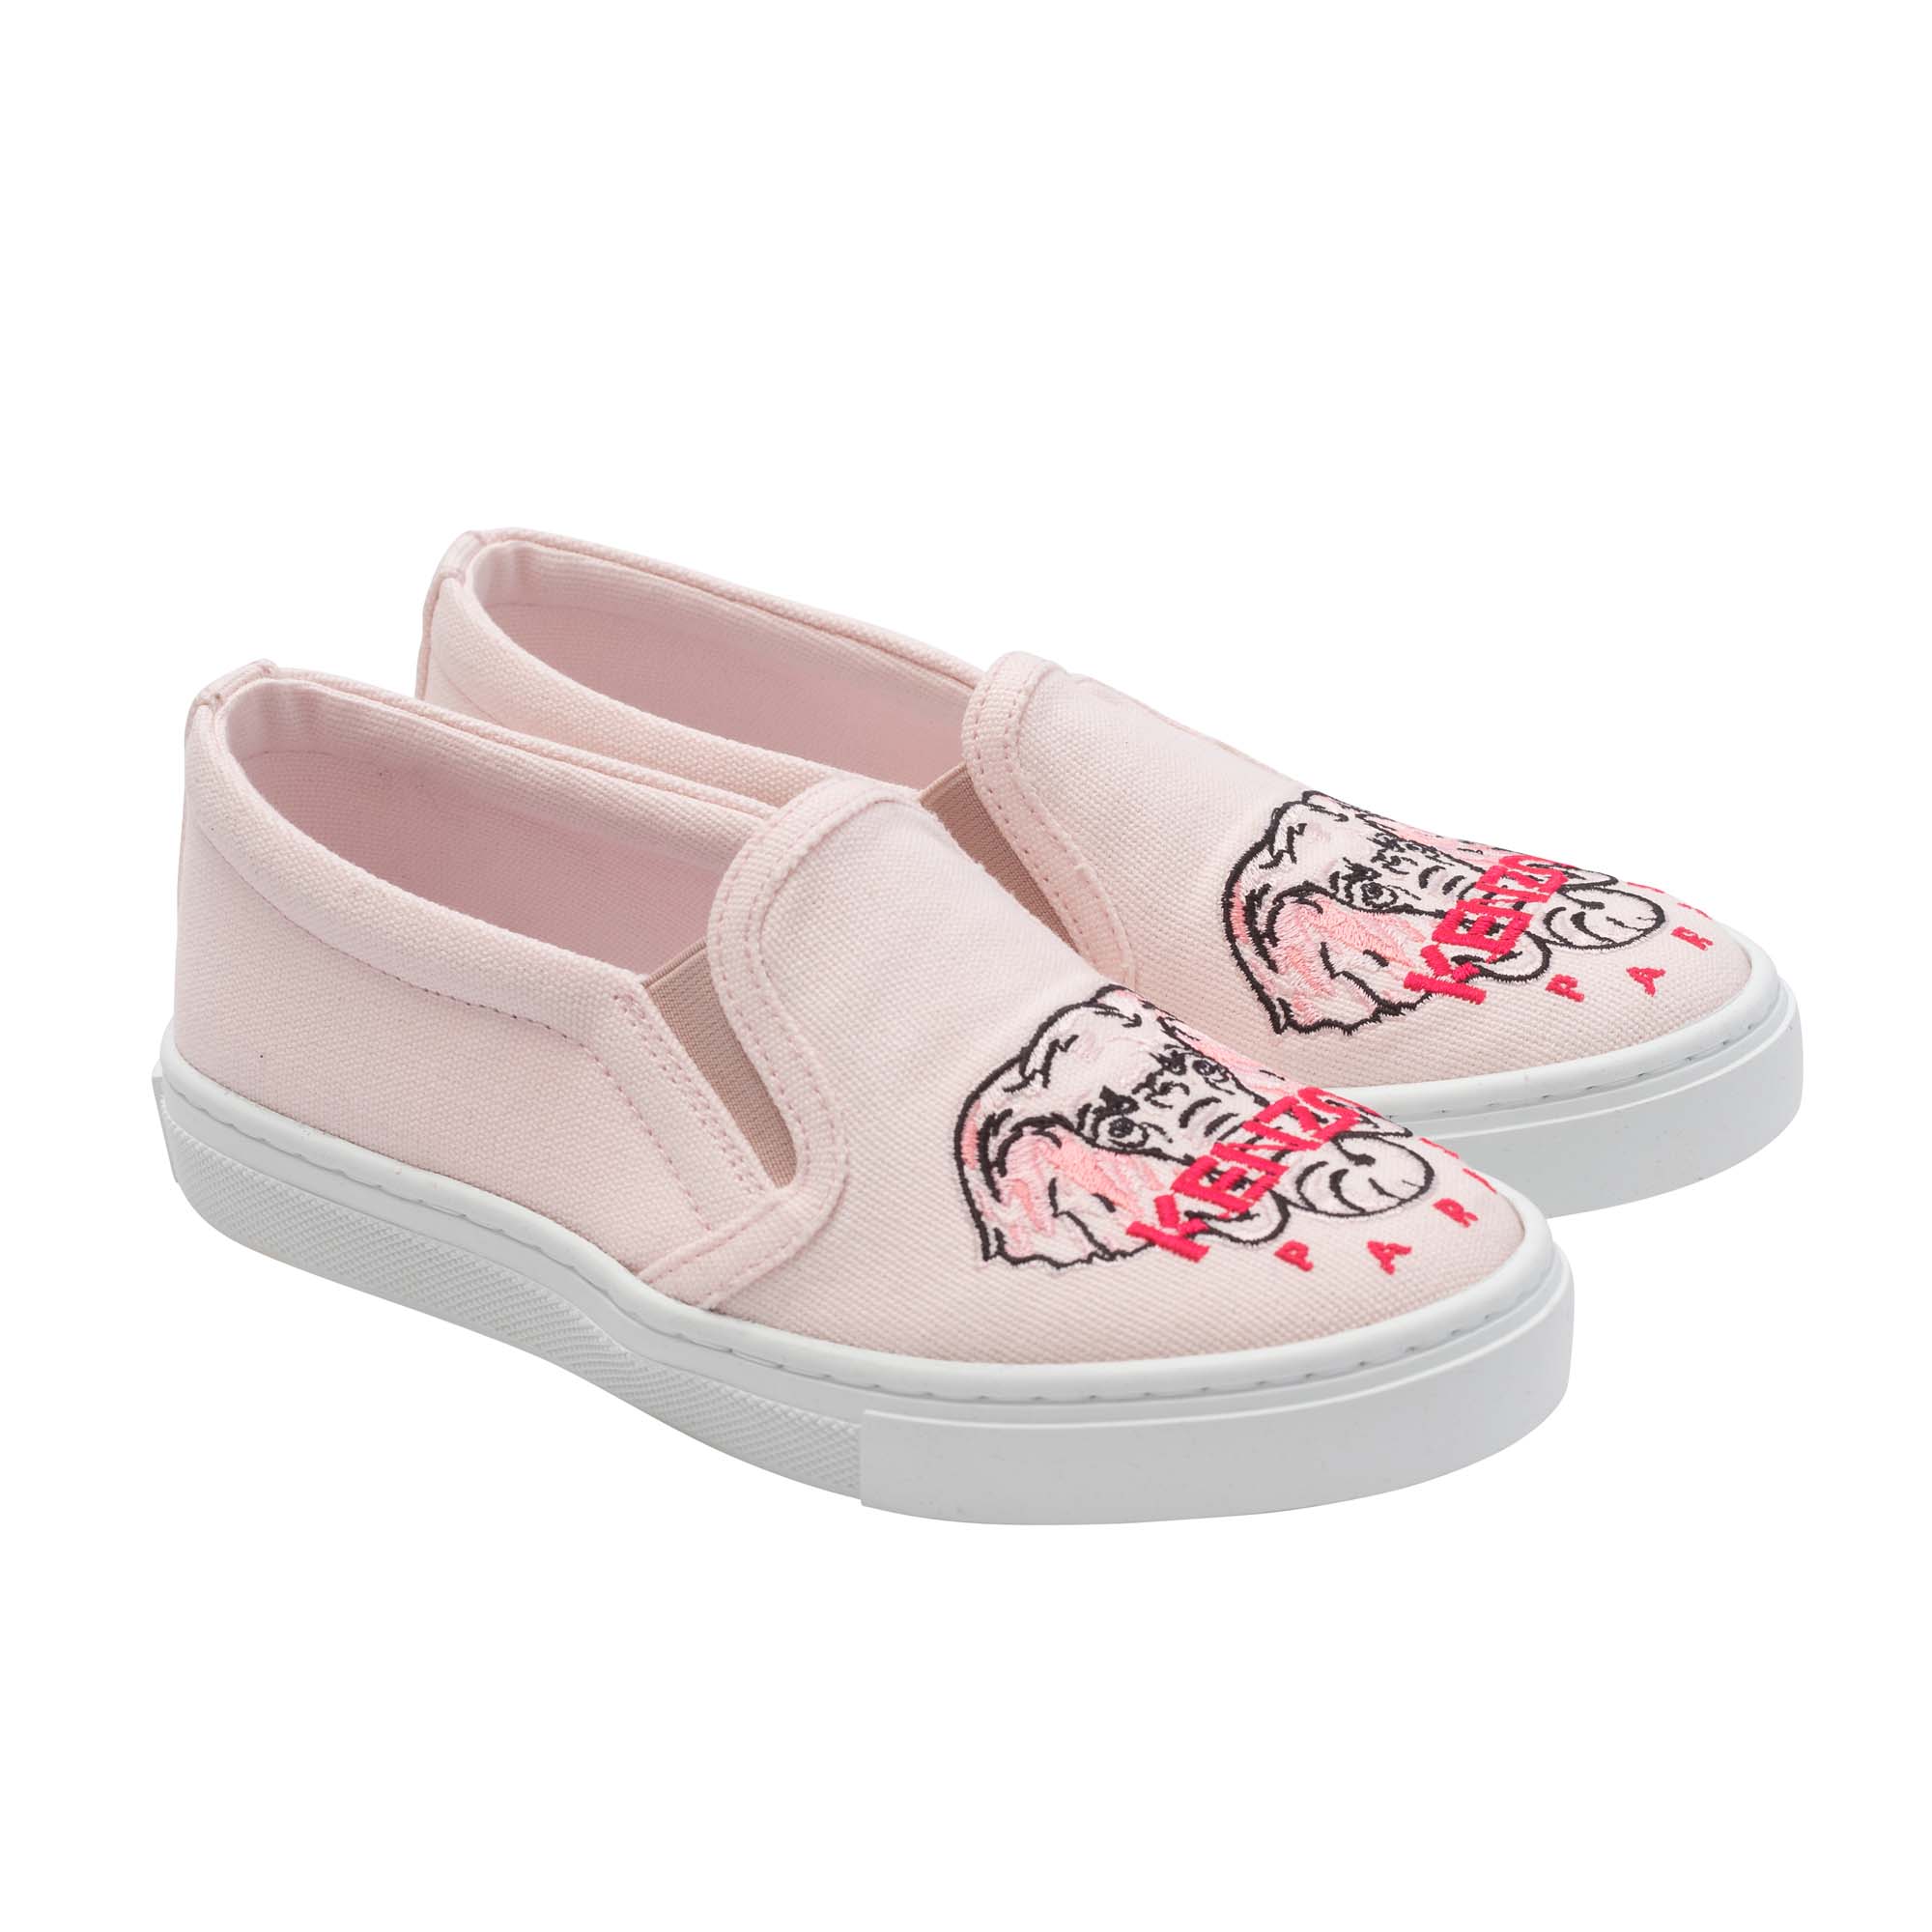 Embroidered cotton shoes KENZO KIDS for GIRL